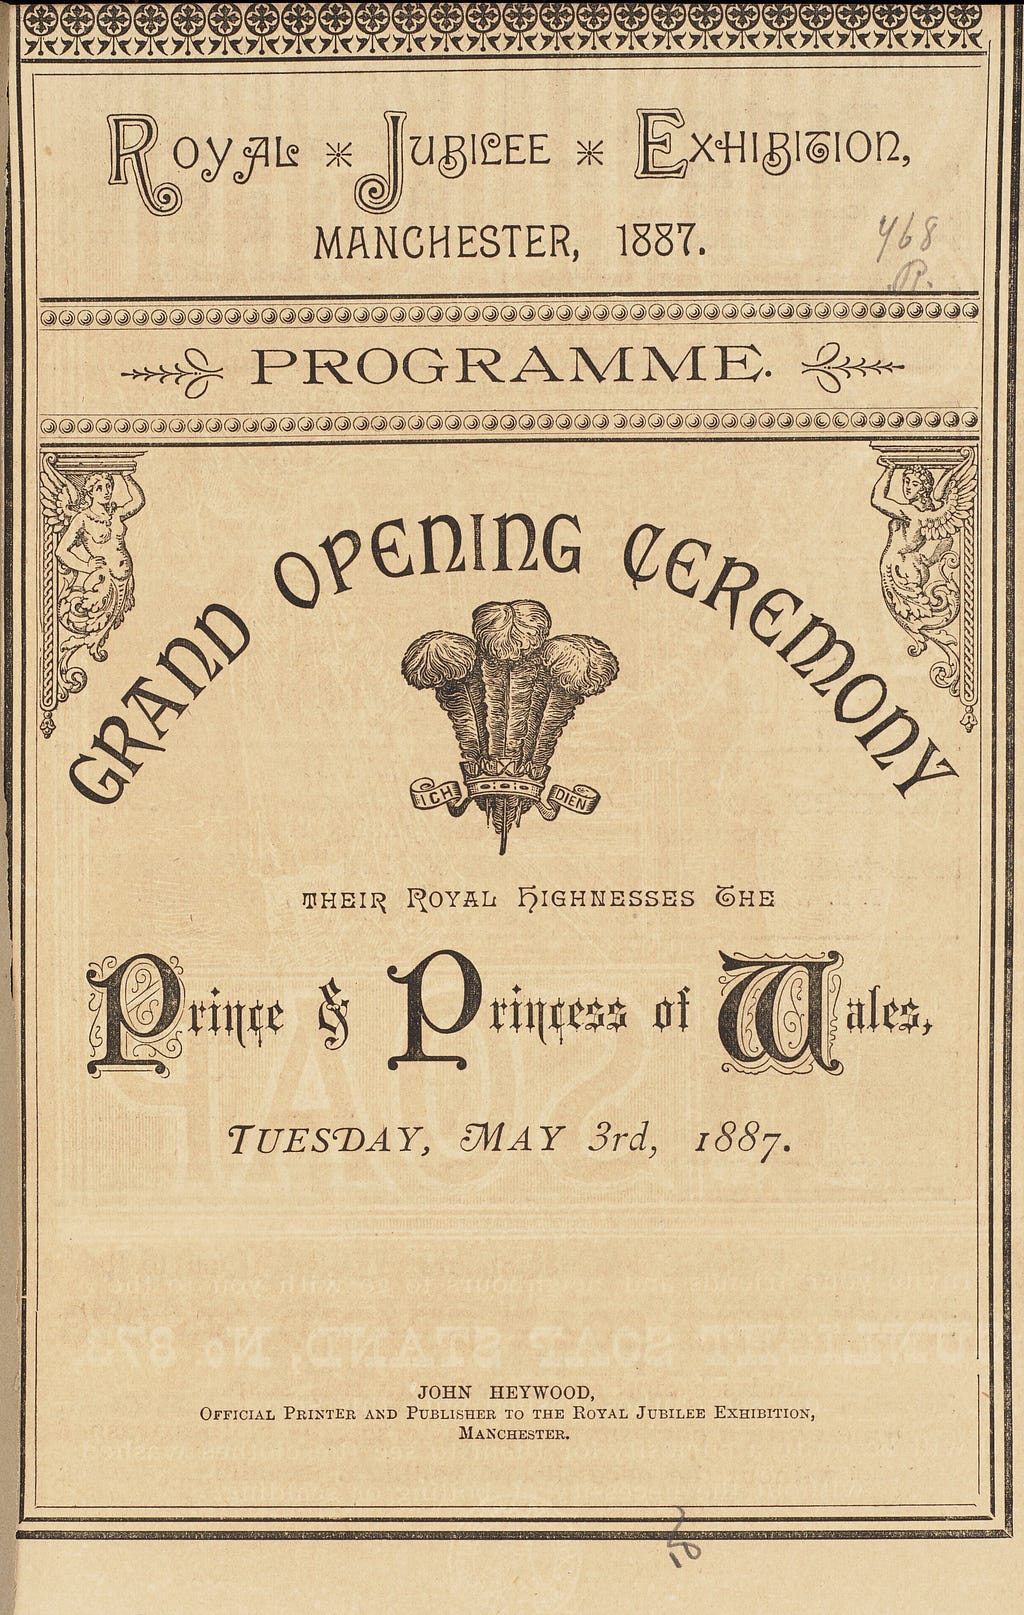 Cover for Grand Opening Ceremony 3 May 1887. Decorative top edge and images of the Prince of Wales feathers and two corbels.